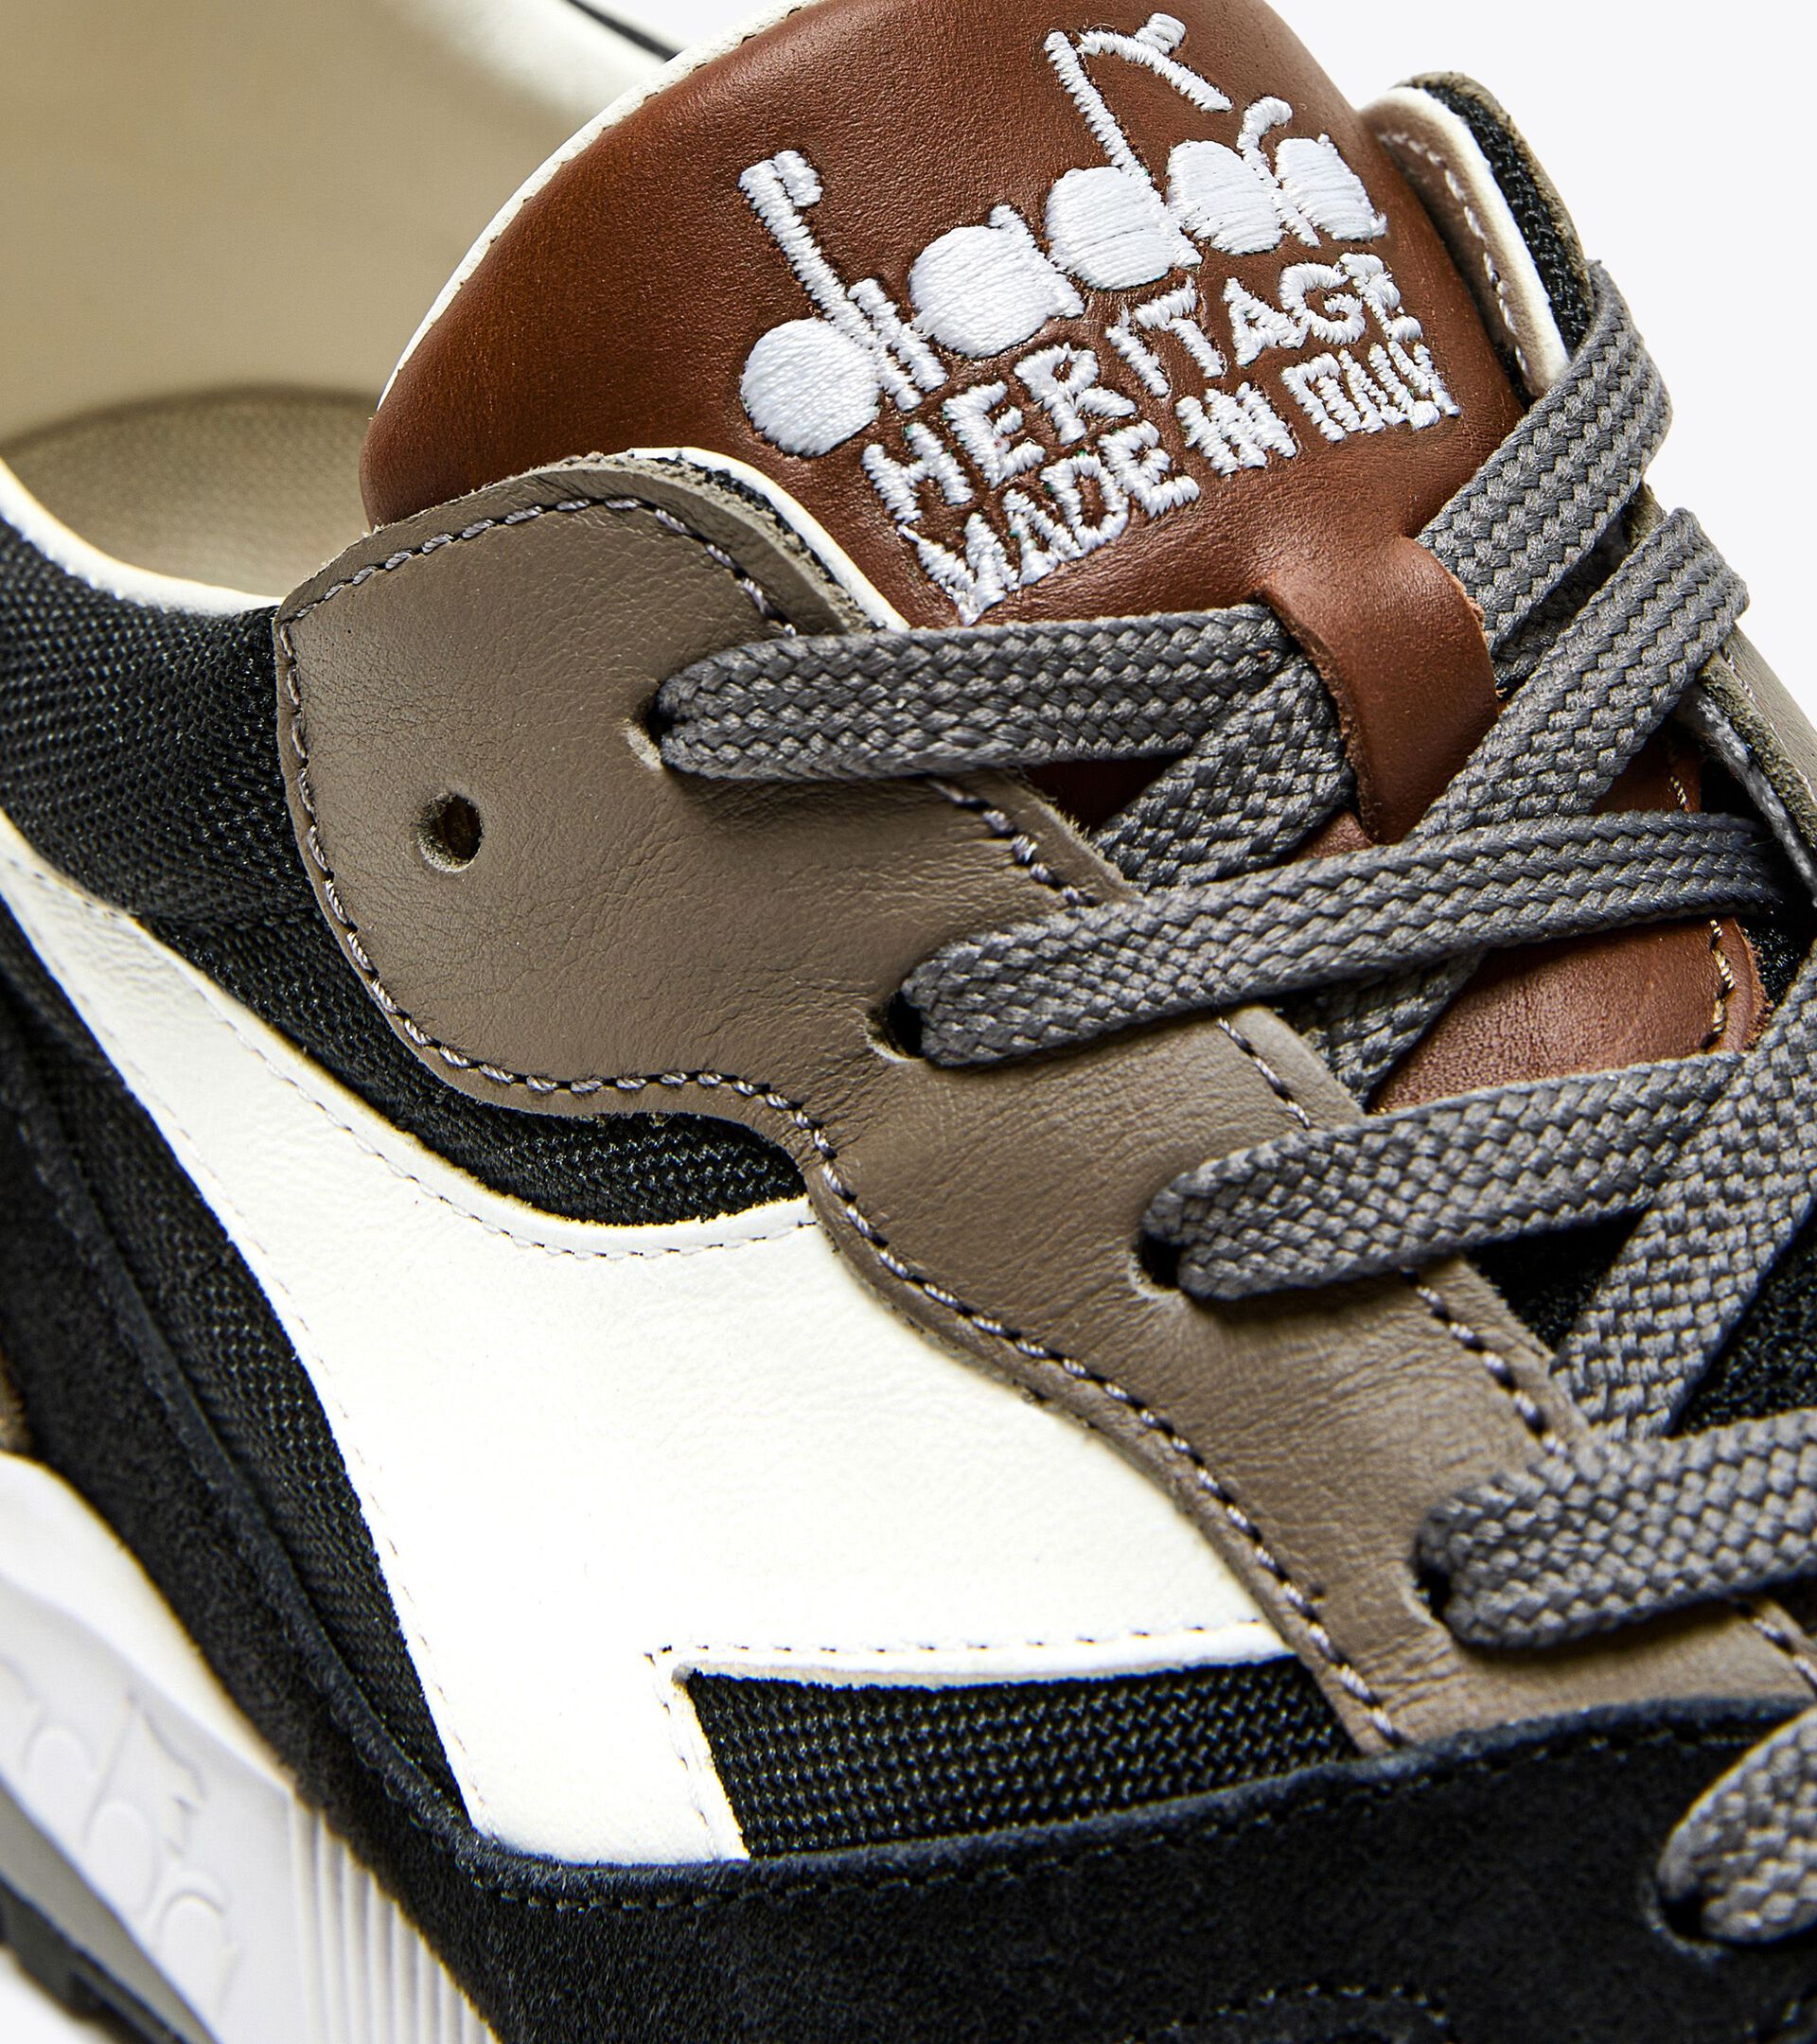 Chaussures Heritage Made in Italy - Homme N9000 2030 ITALIA NOIR - Diadora